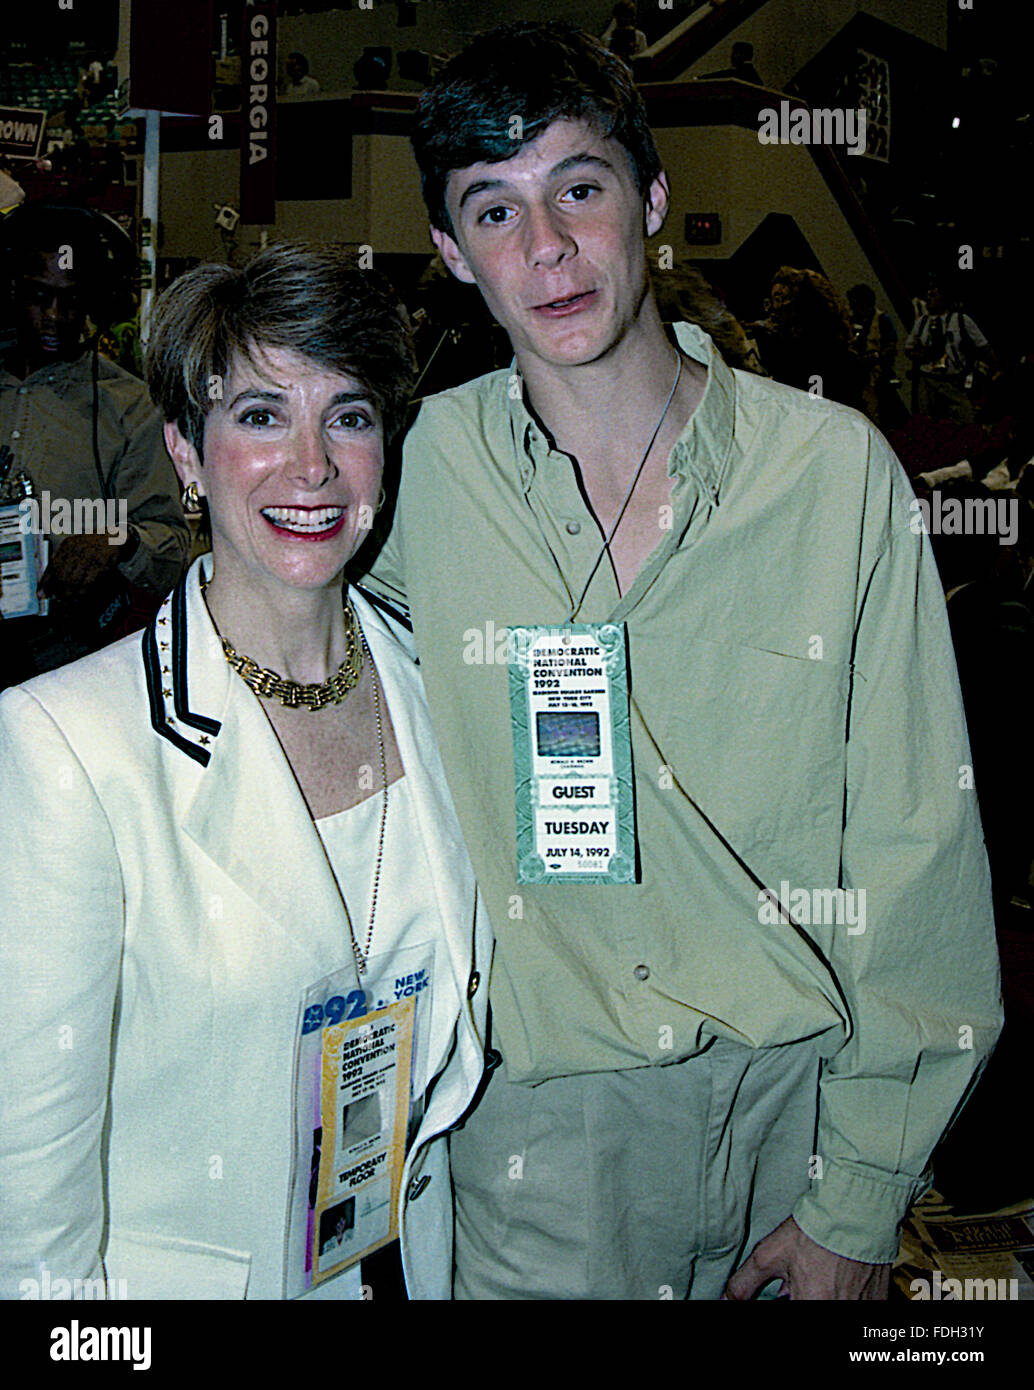 New York, NY., USA, 14th July,1992 Congresswoman Marjorie Margolies-Mezvinsky (D-PA) and her son Marc Mezvinsky (15 years old)  pose together while walking the floor of the Democratic National Convention in Madison Square Garden. Marjorie Margolies, is a former journalist and a Democratic politician. From 1993 to 1995, she was a member of the U.S. House of Representatives, representing Pennsylvania. Her son, Marc Mezvinsky, married Chelsea Clinton, the daughter of former U.S. President Bill Clinton and former U.S. Secretary of State Hillary Rodham Clinton. Credit: Mark Reinstein Stock Photo